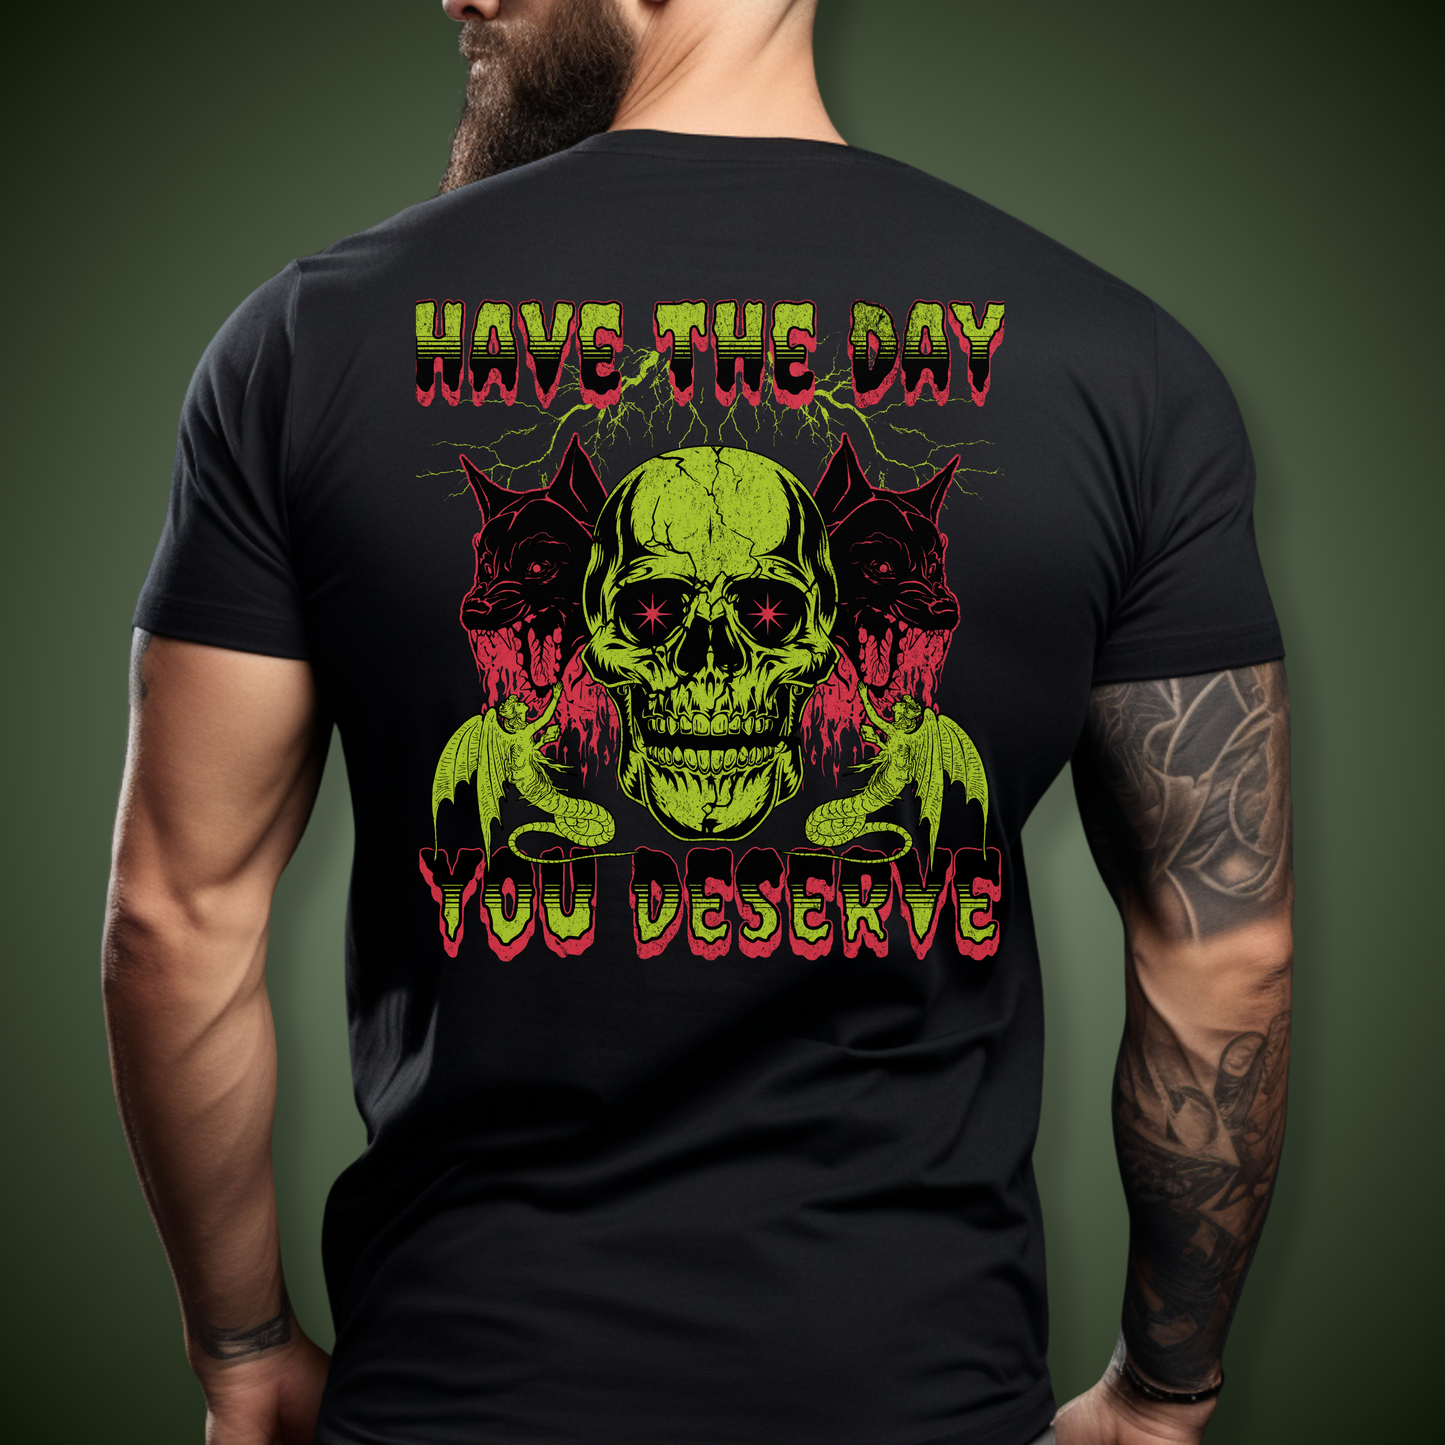 Day You Deserve Back Tee